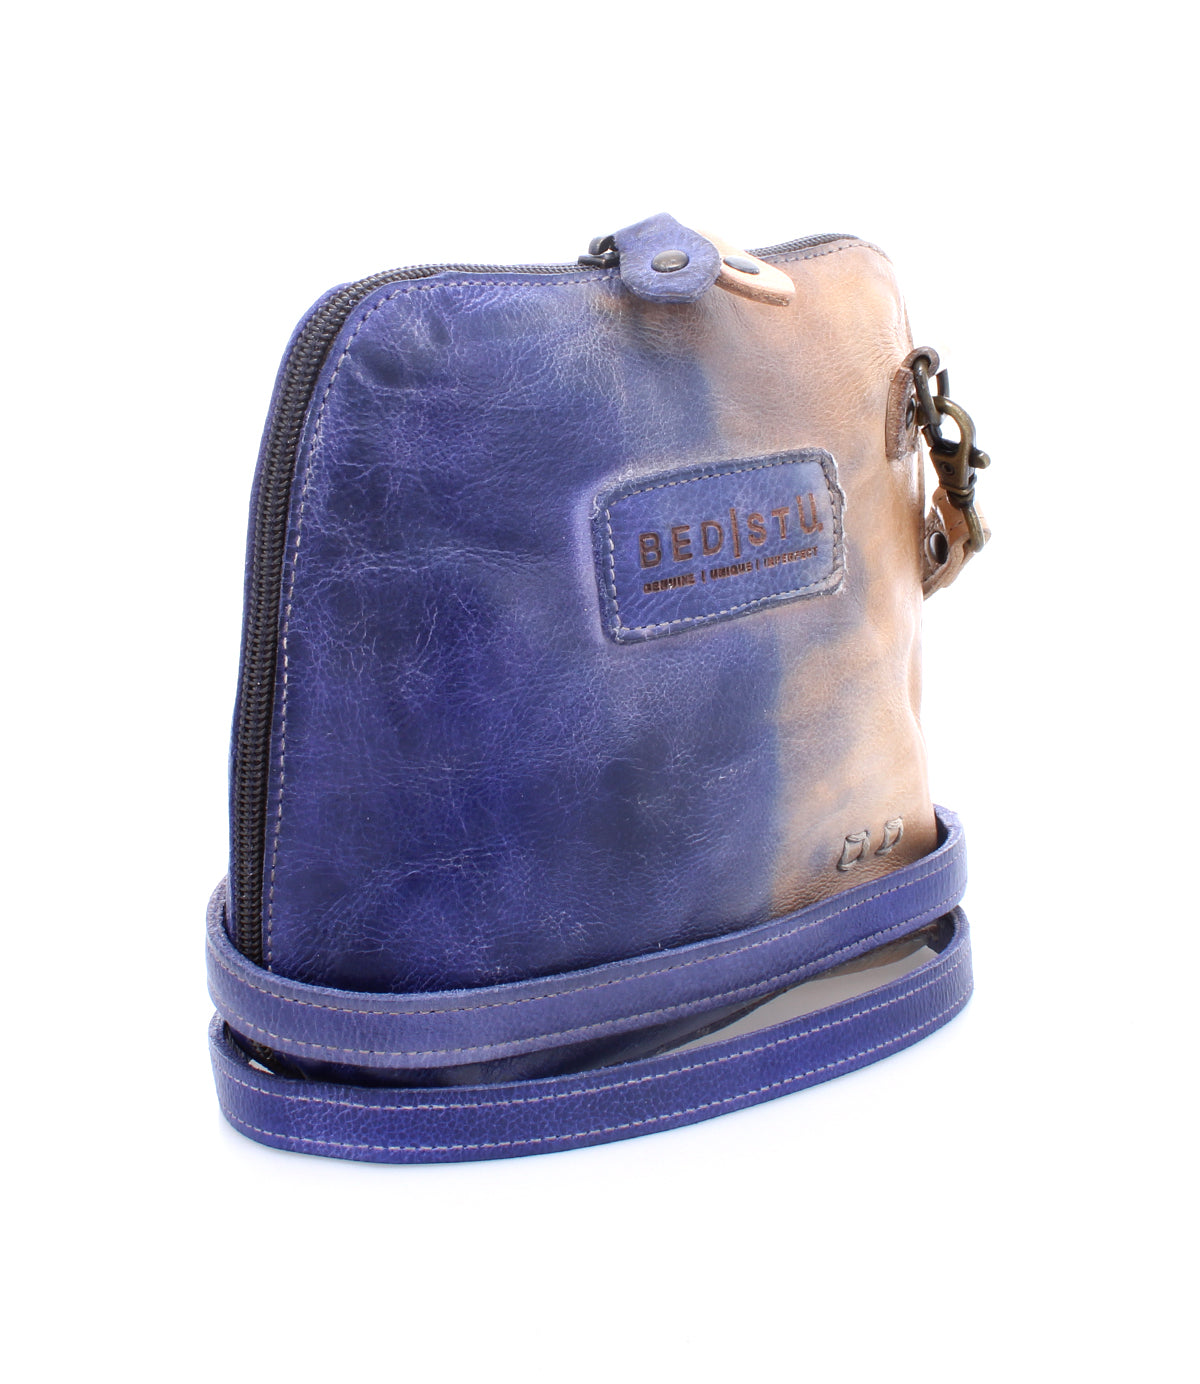 A blue and brown Bed Stu Ventura leather purse with a zipper, perfect for a Saturday adventure.